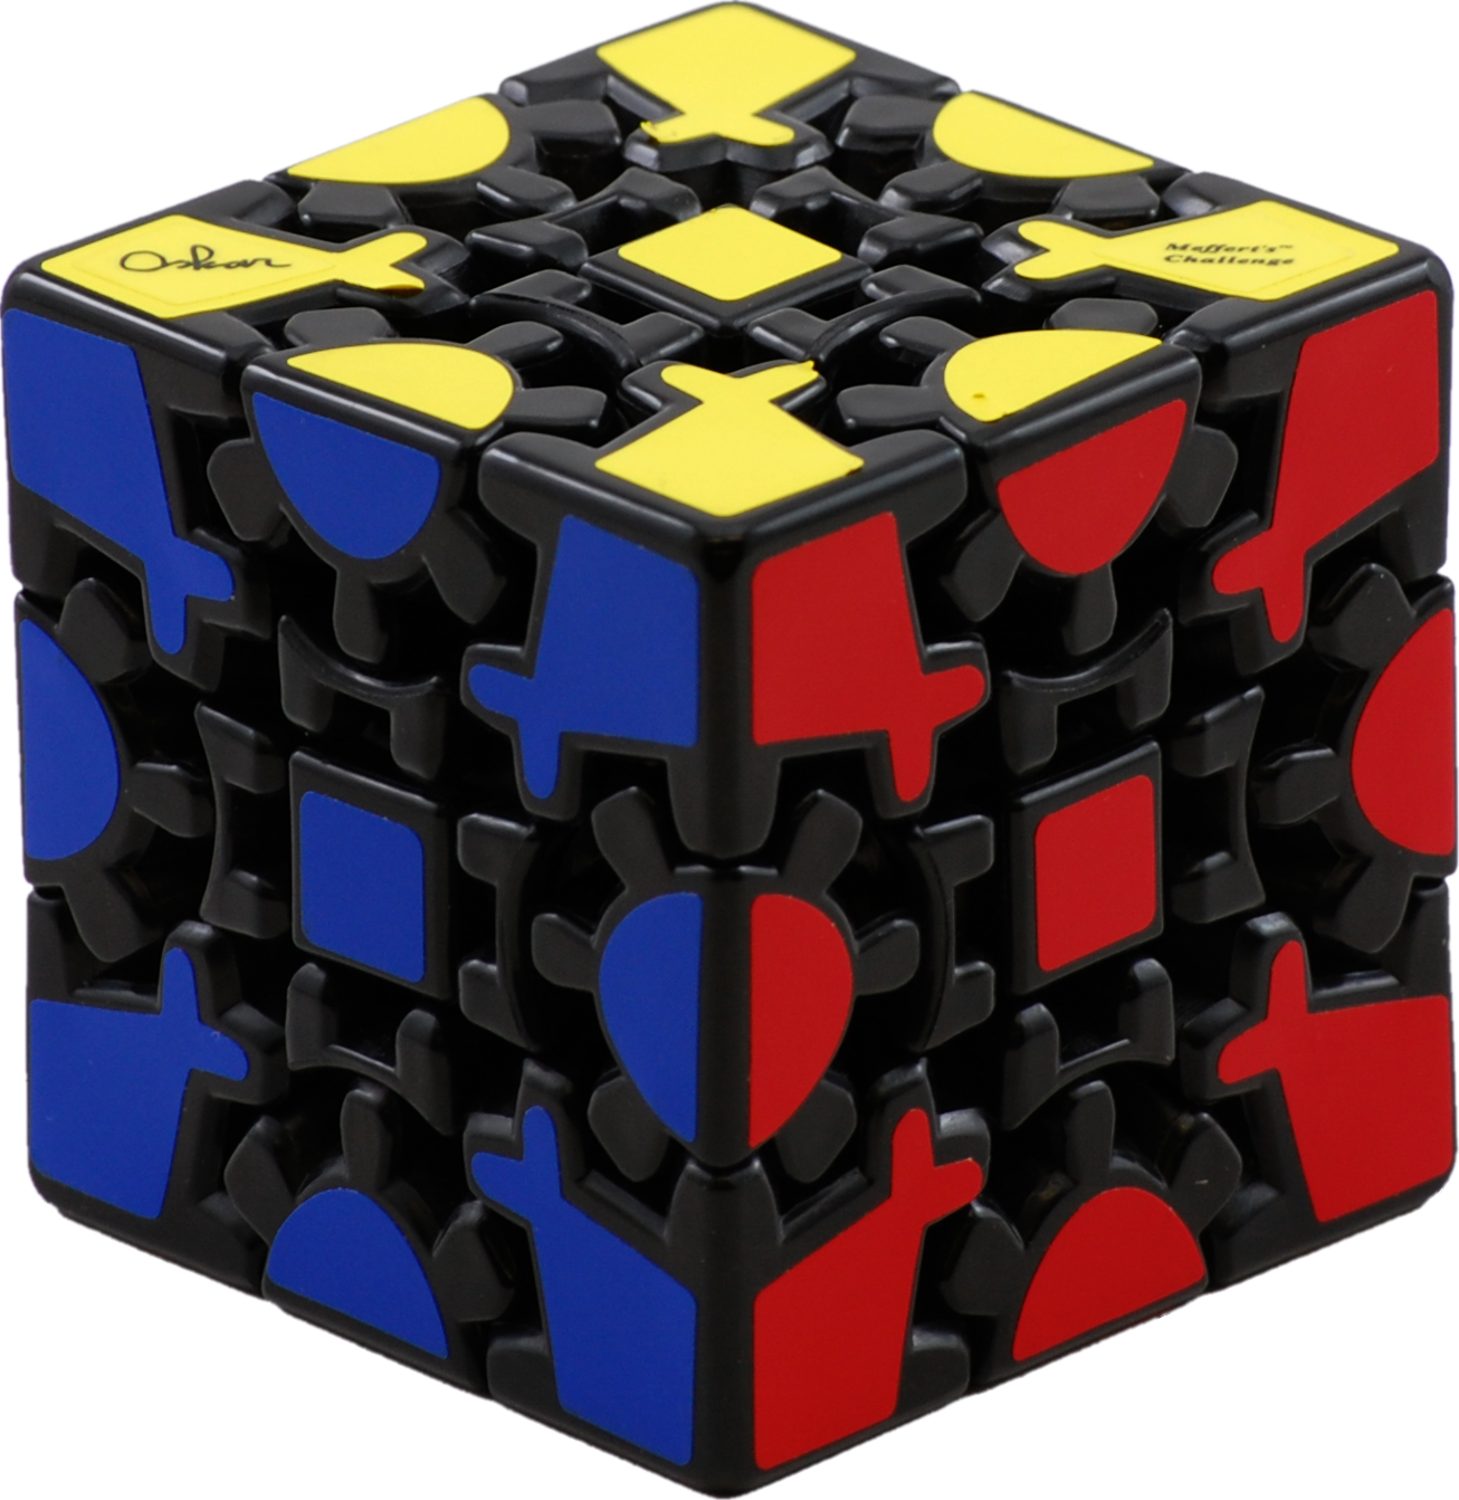 A Cube With Different Colored Pieces